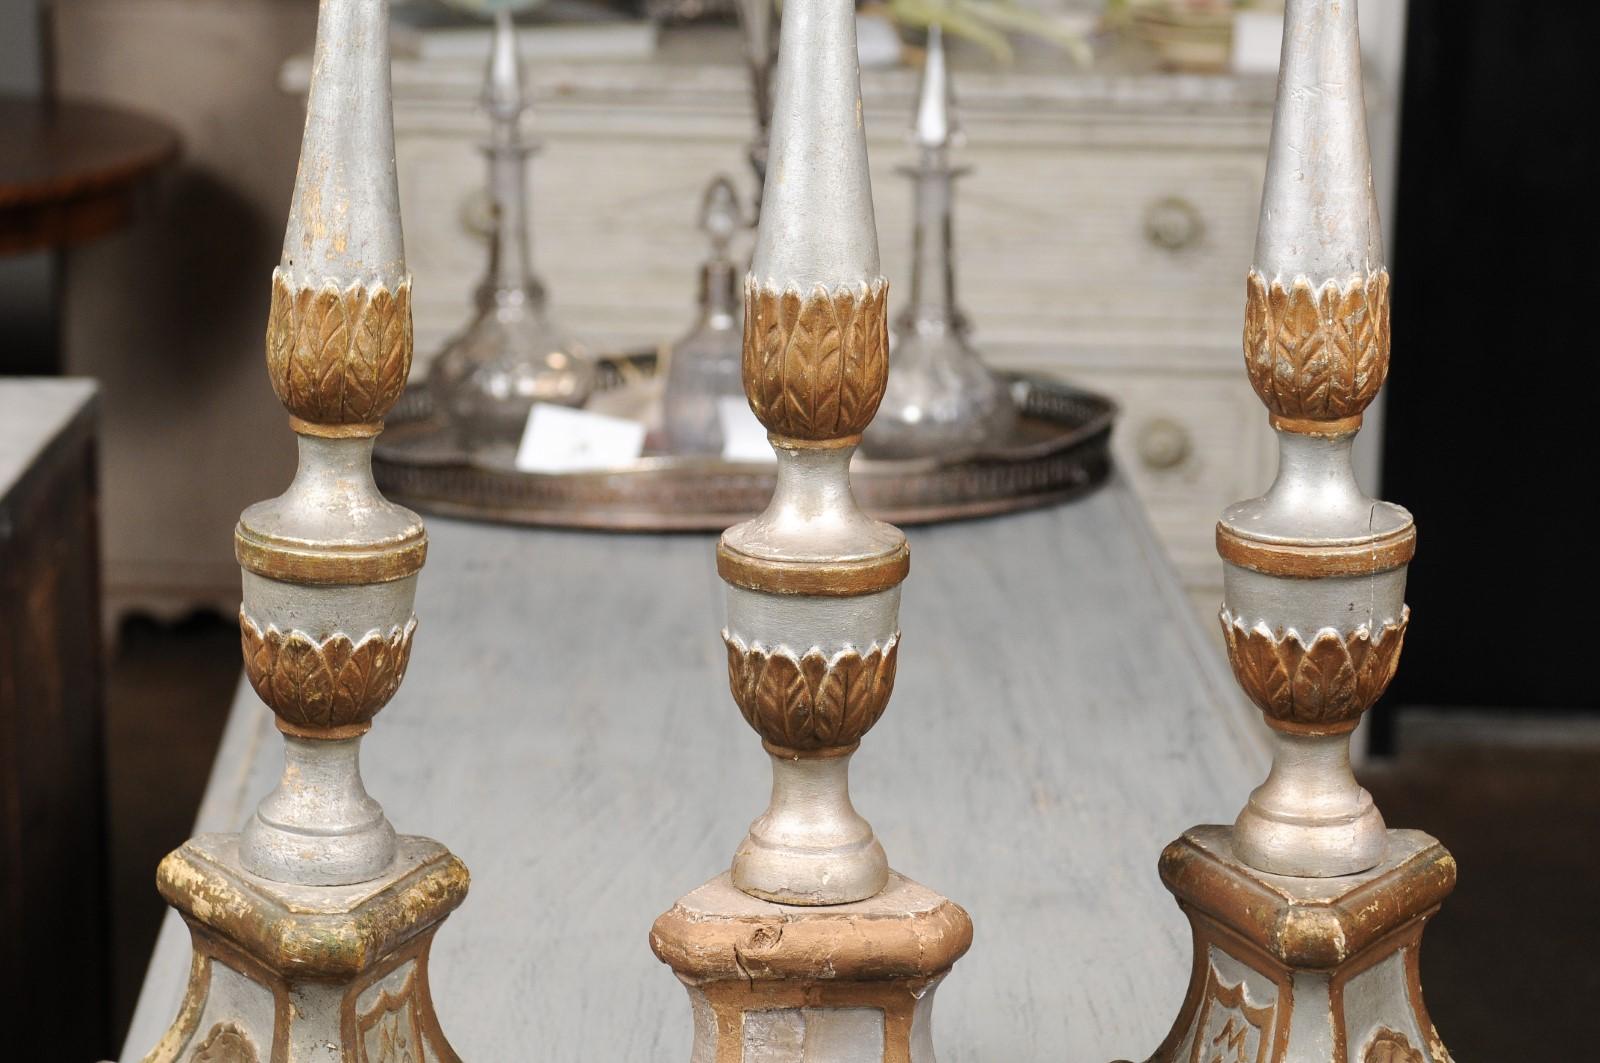 Italian 18th Century Silver Gilt Candlesticks with Painted and Carved Motifs 1